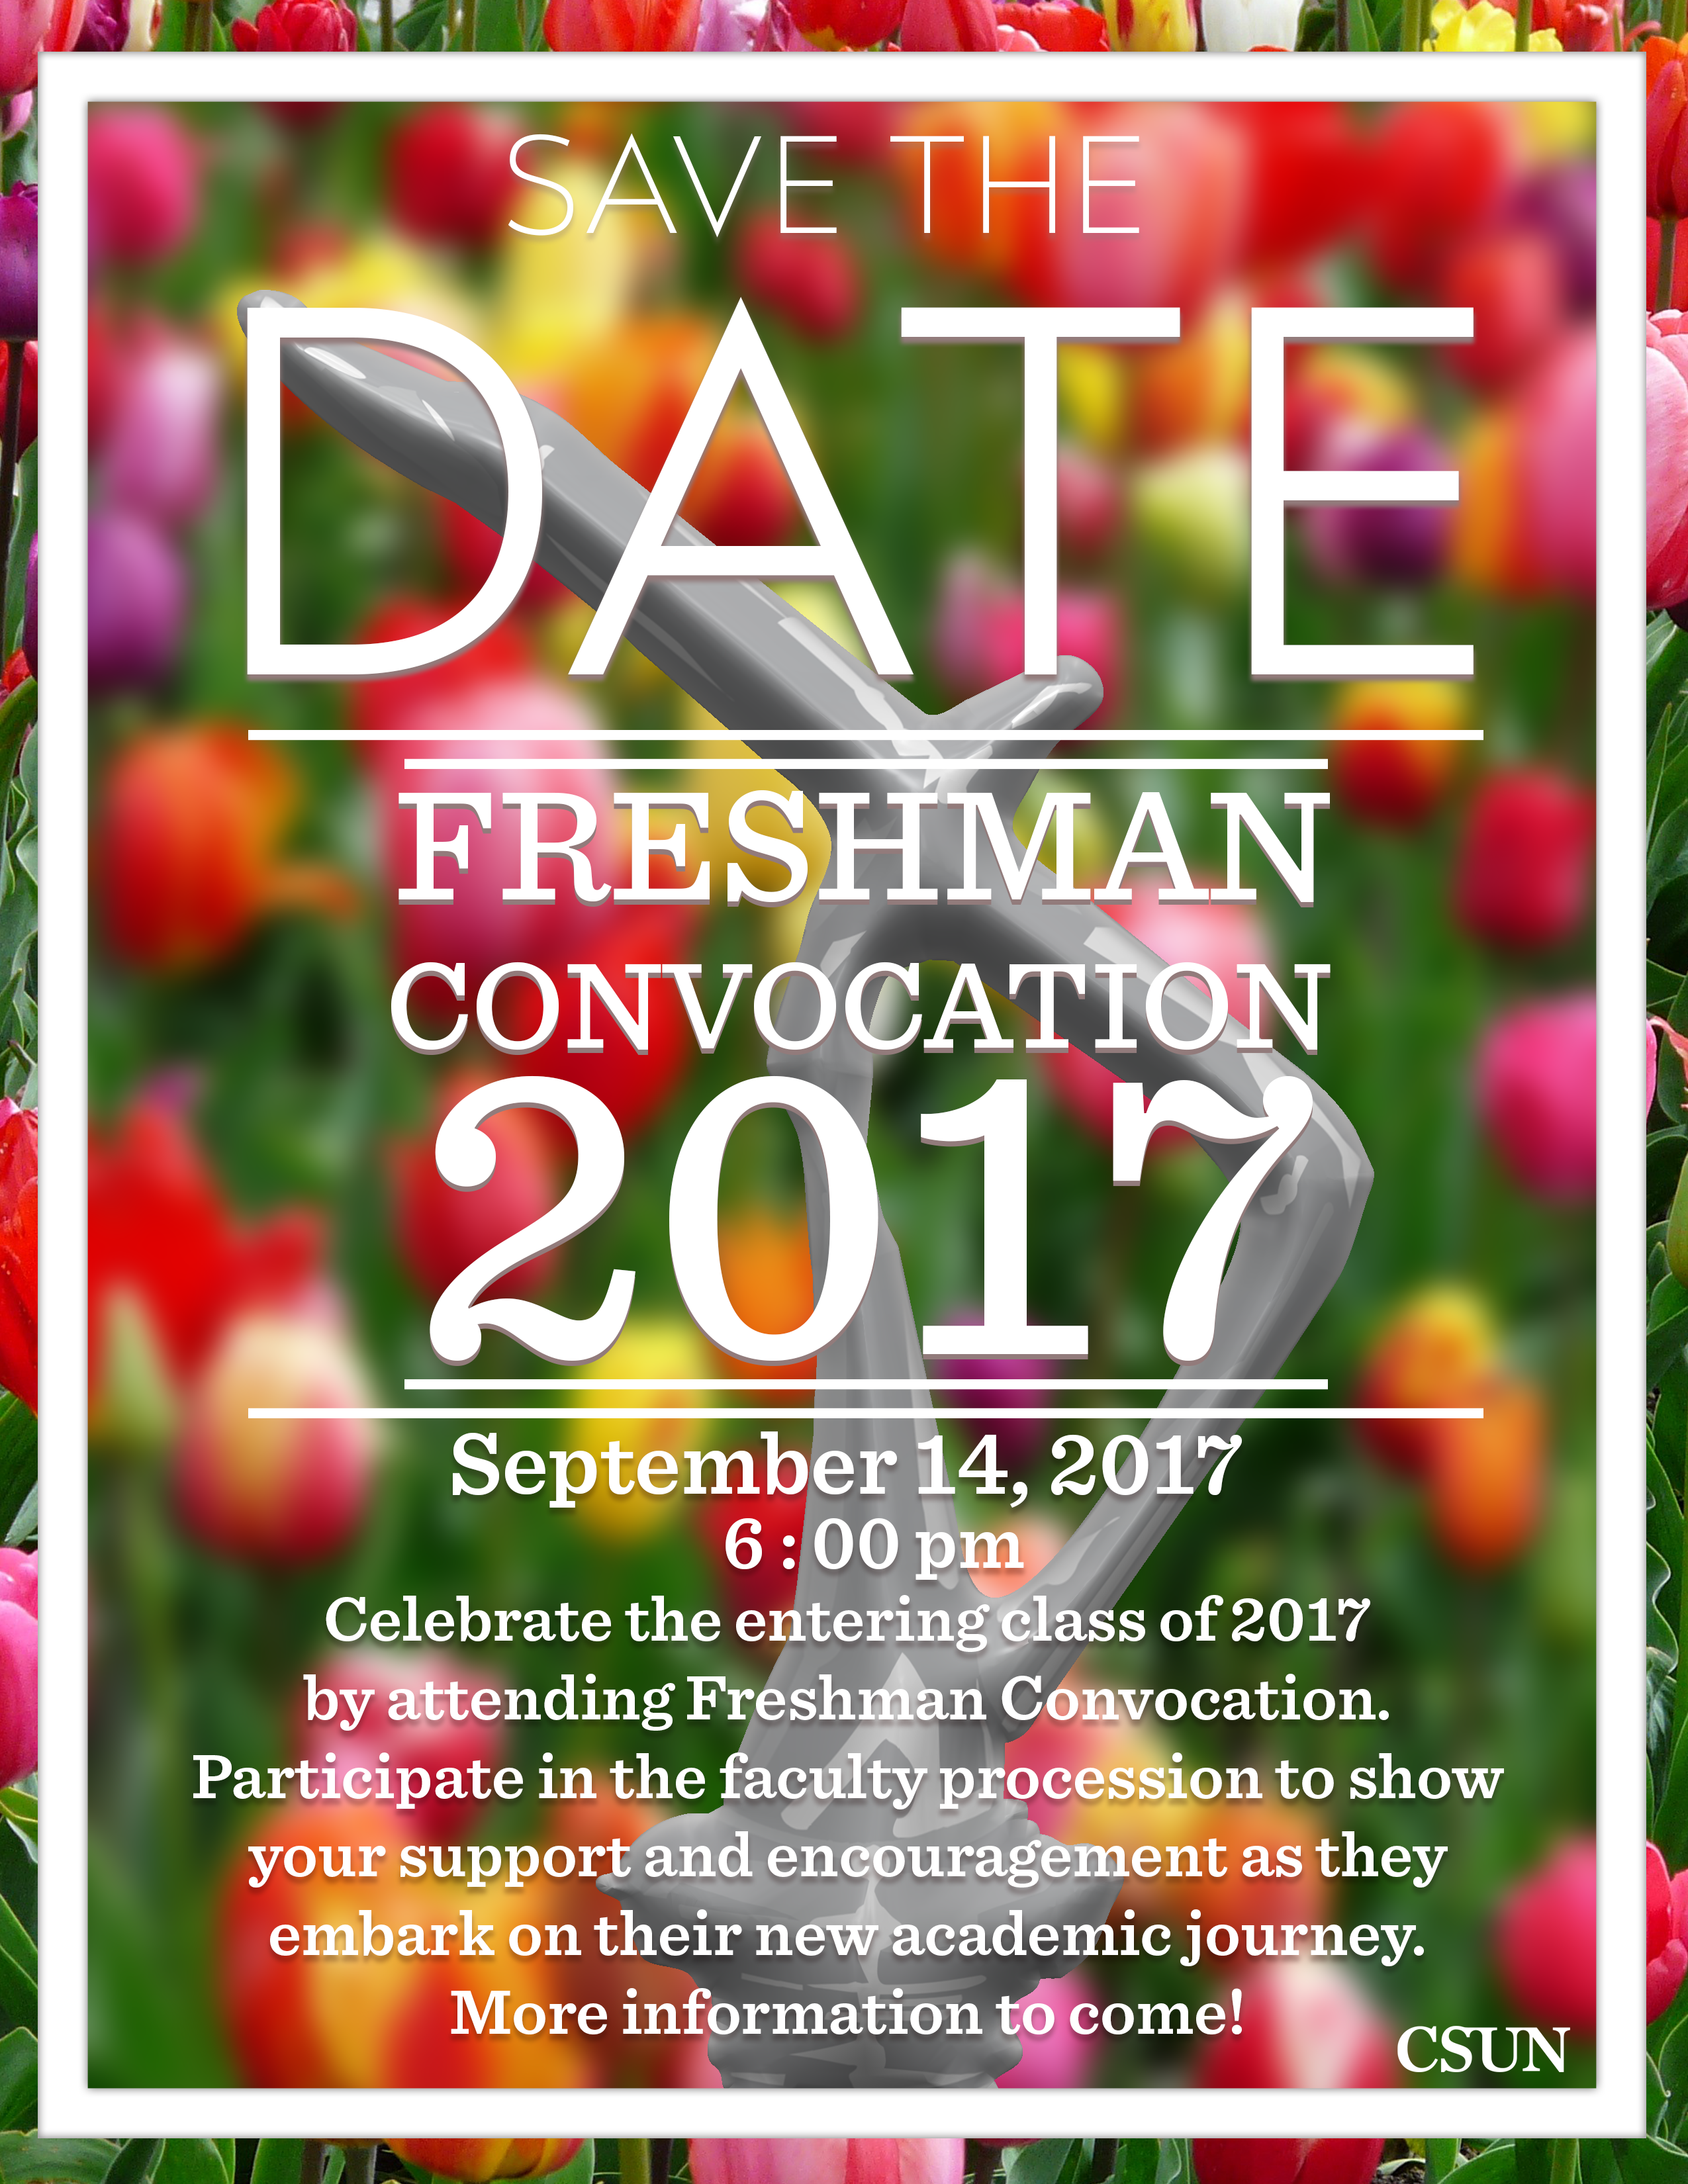 Save the date for Freshman Convocation 2017 on Thursday, September 14, at 6 p.m., Oviatt Lawn